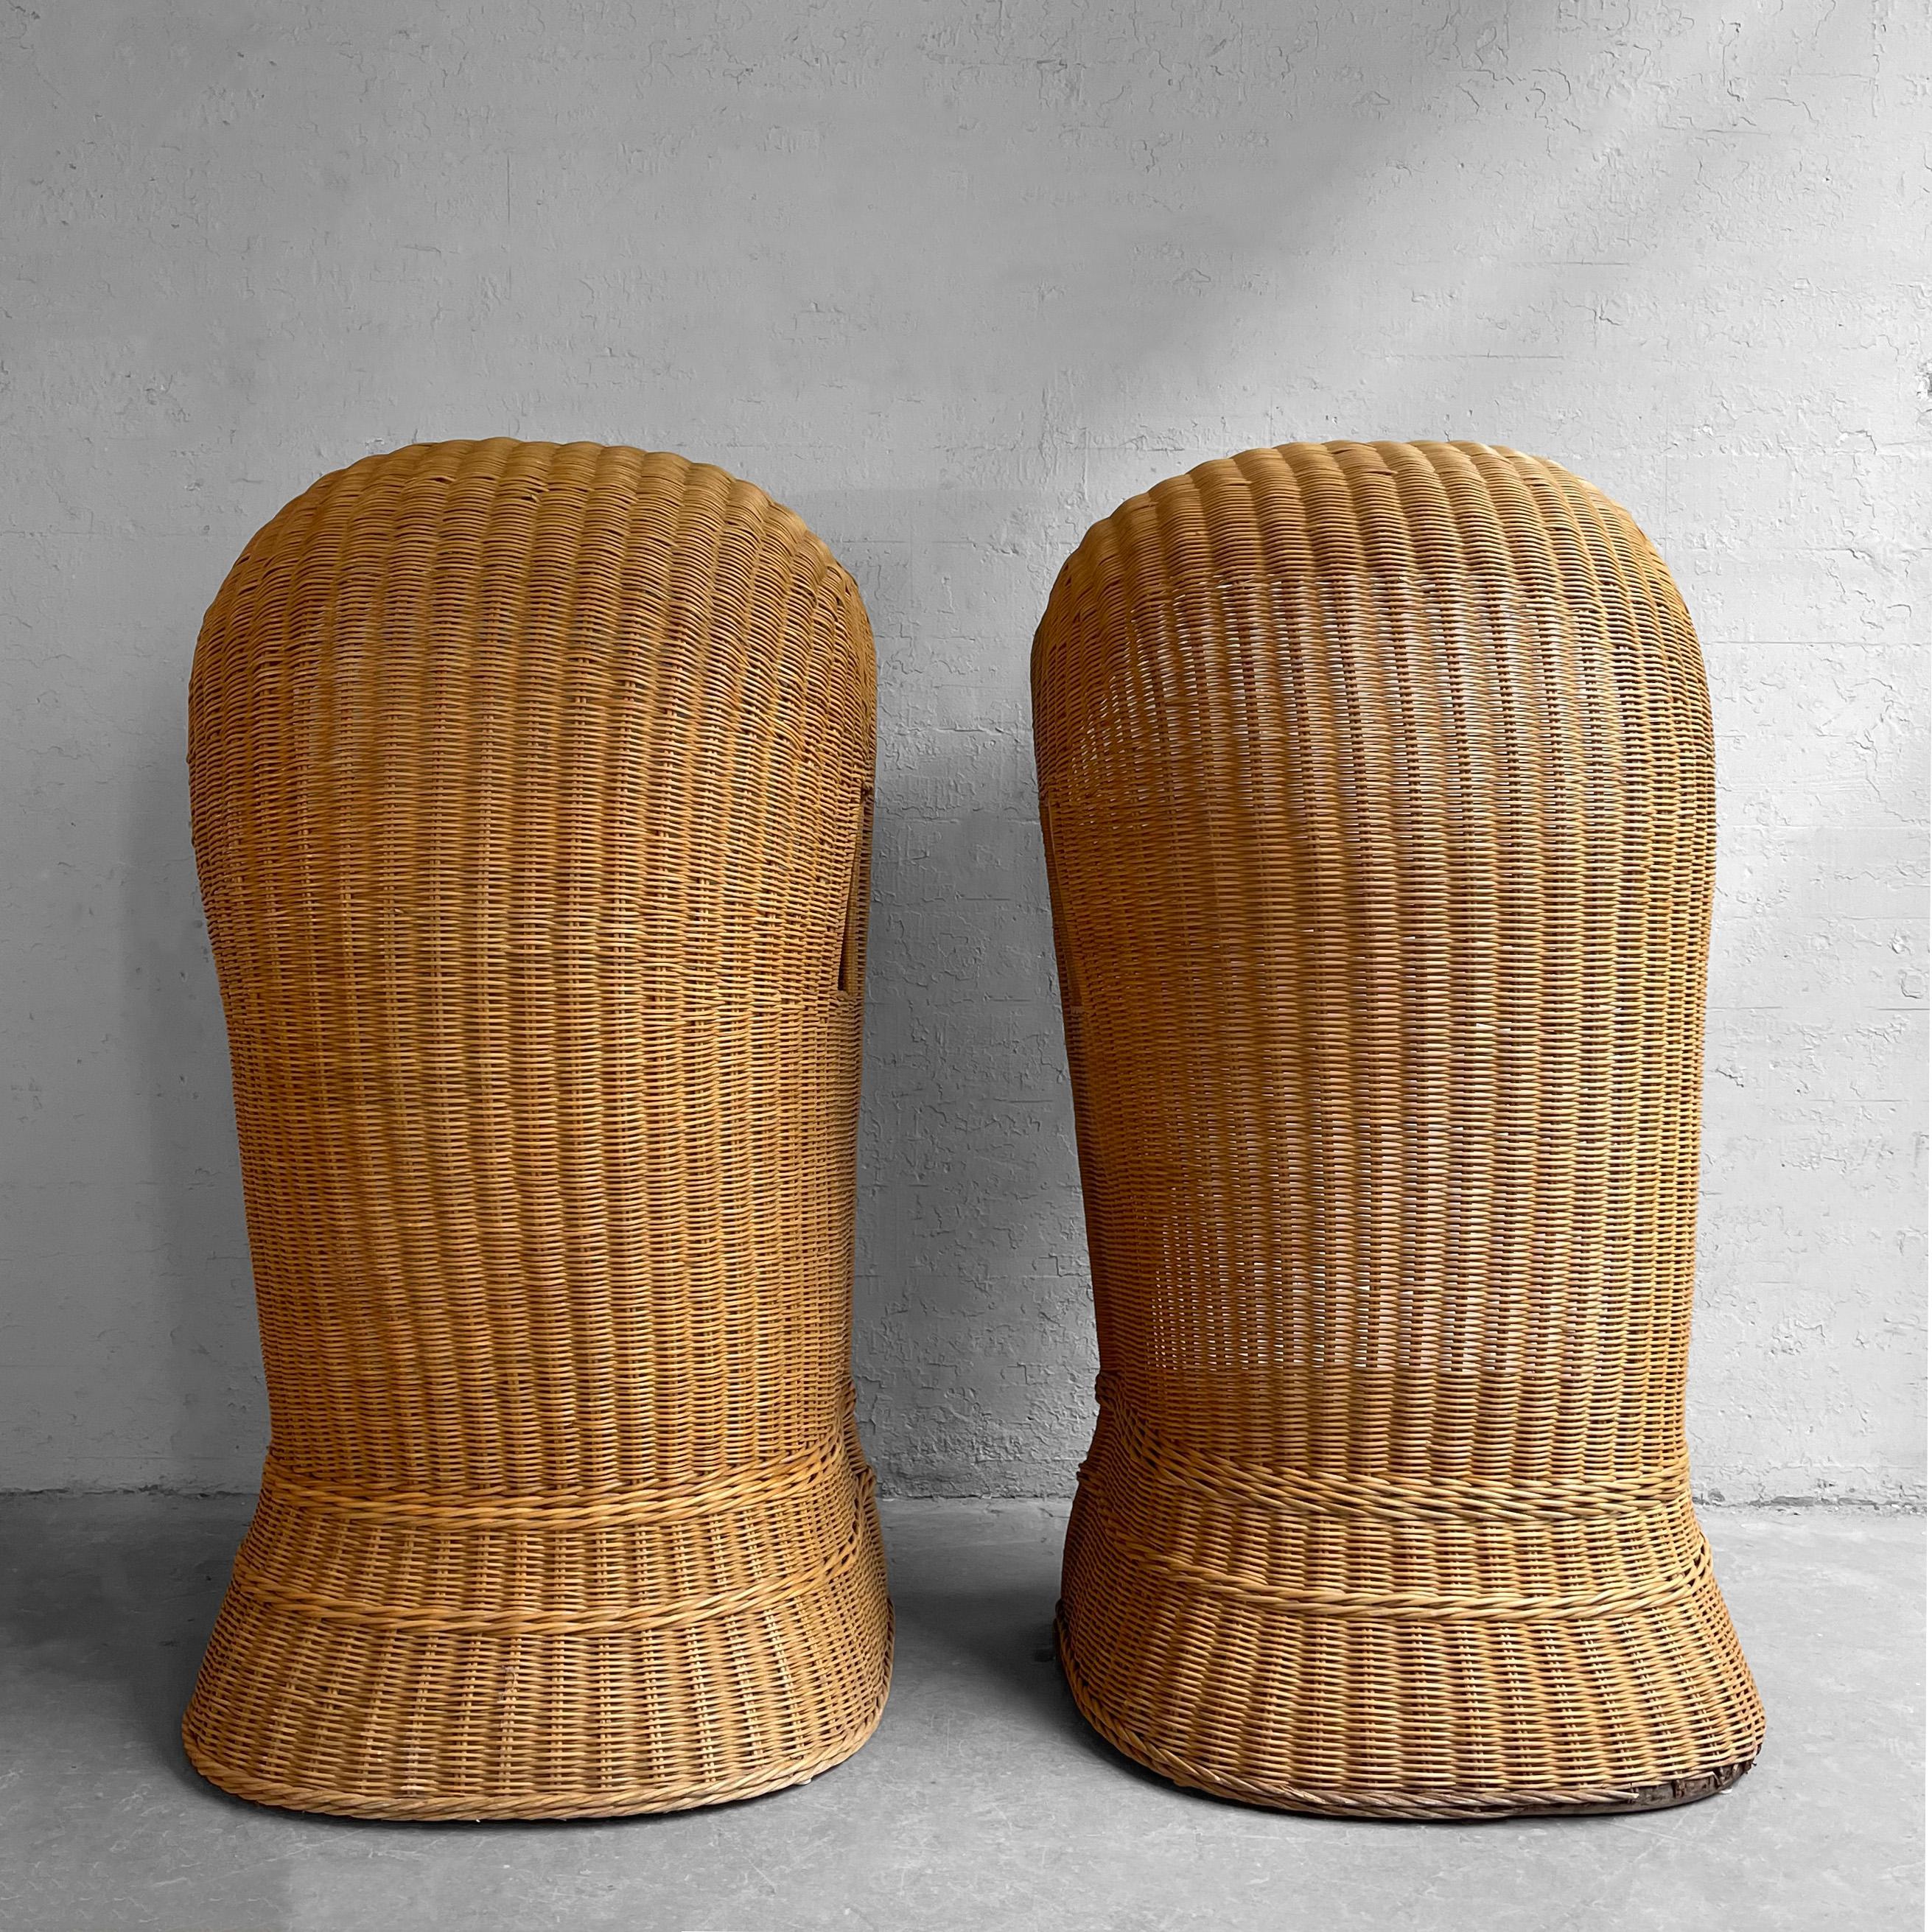 Pair Of Woven Wicker Porter's Chairs 1